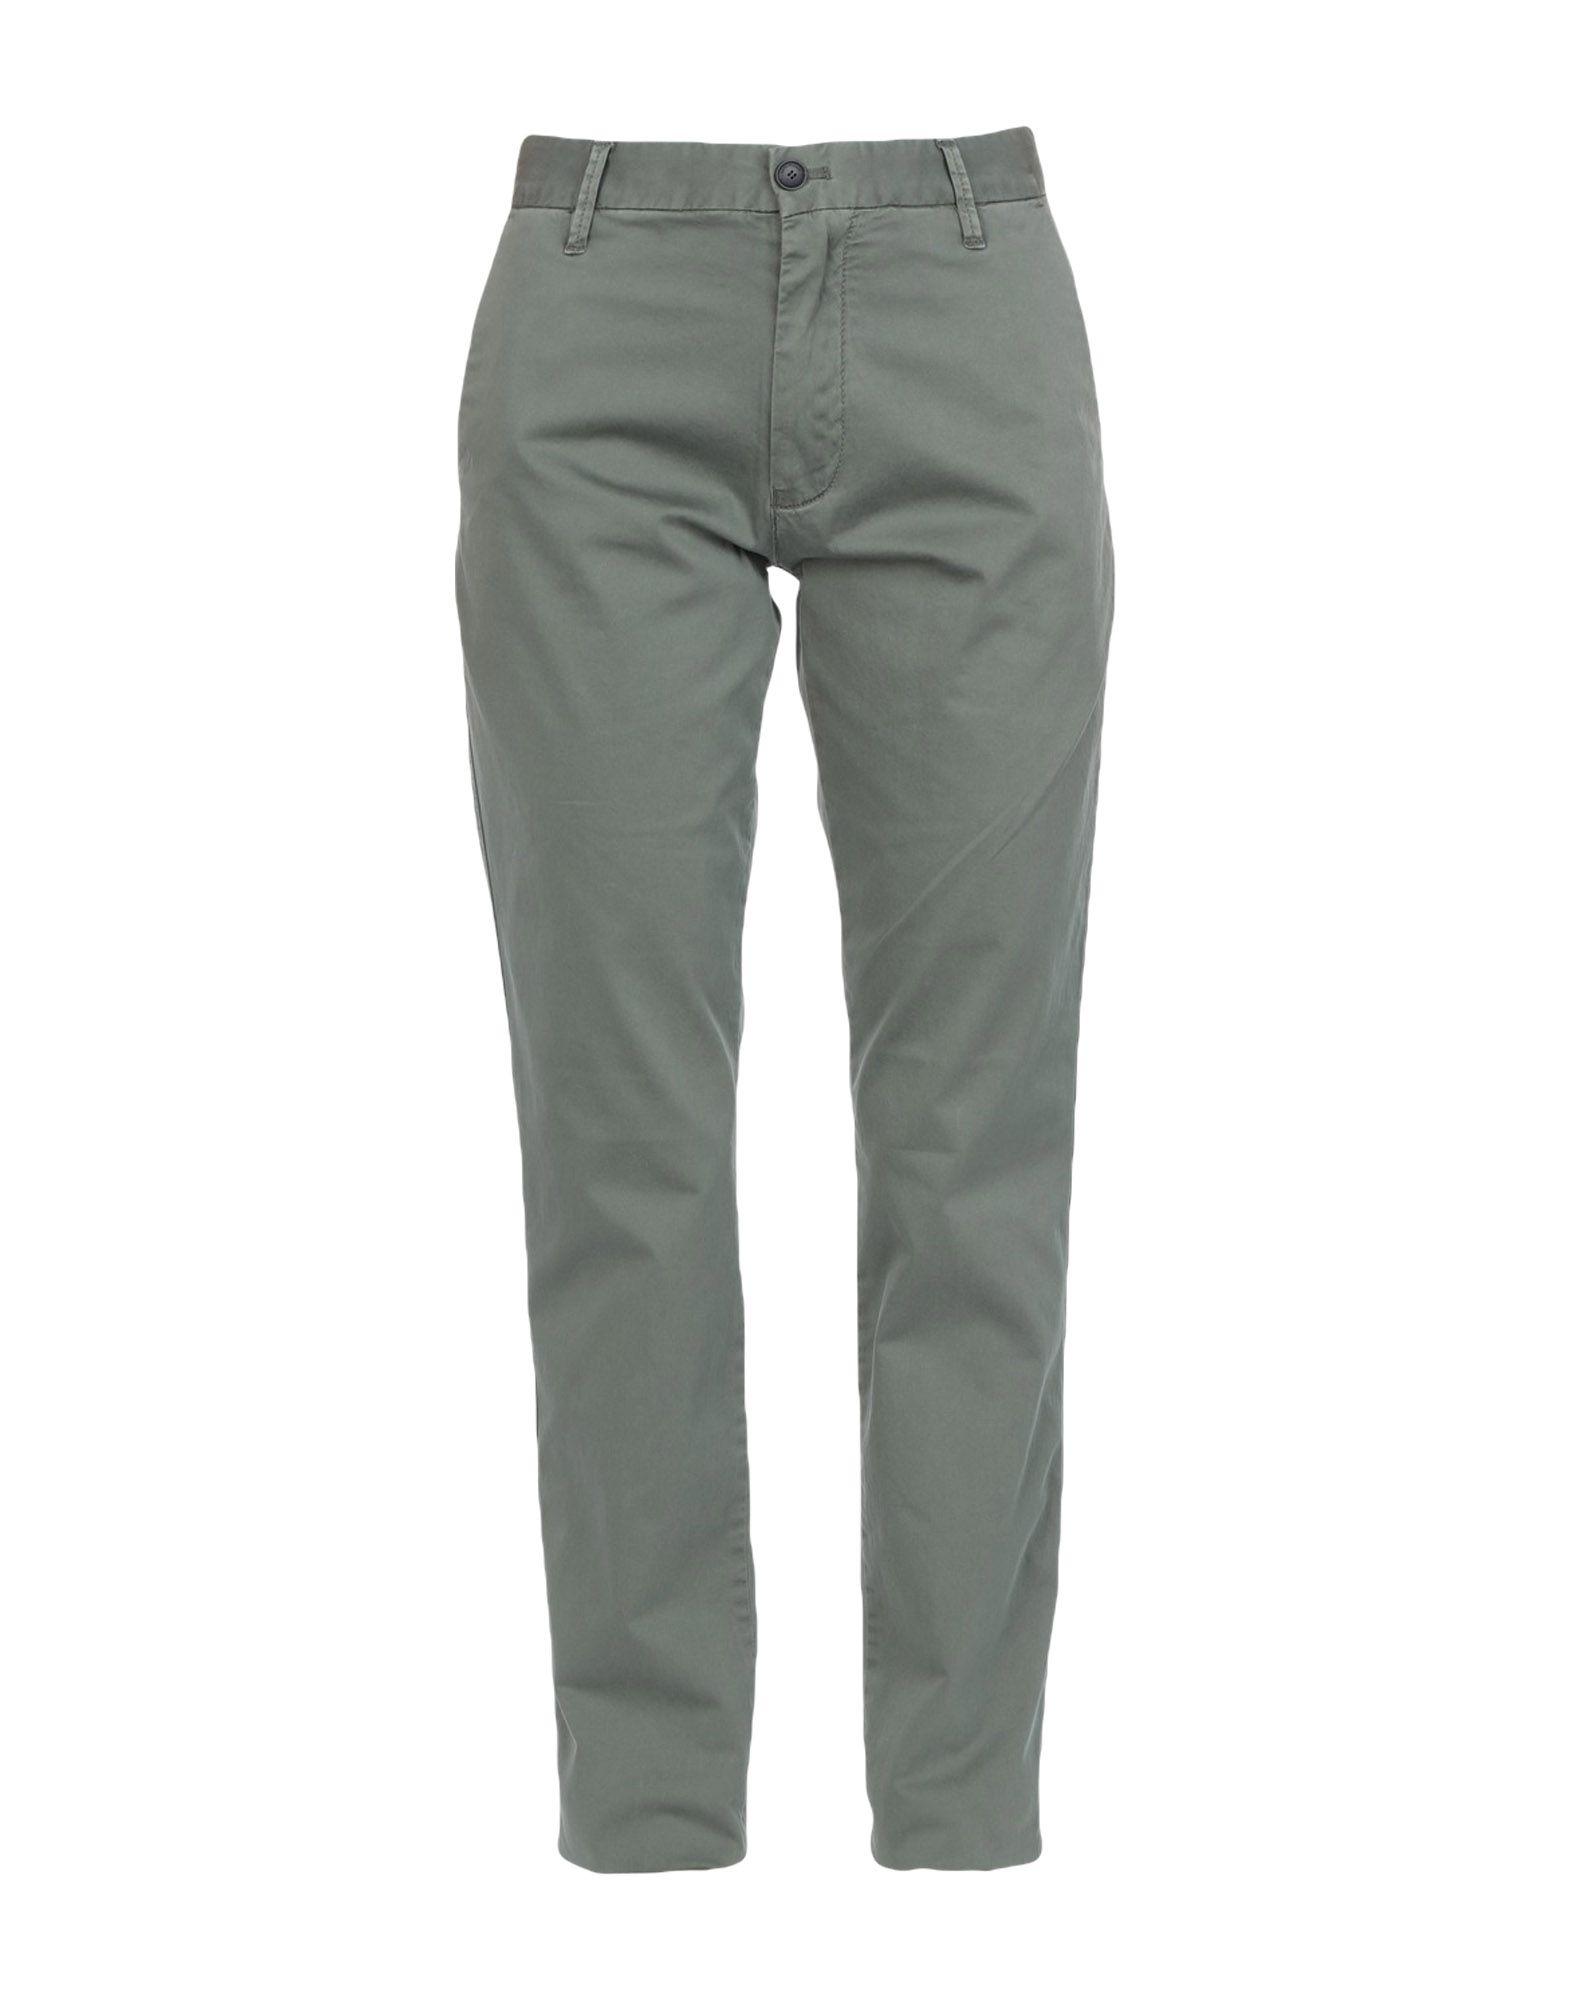 Emporio Armani Cotton Casual Pants in Military Green (Green) for Men - Lyst